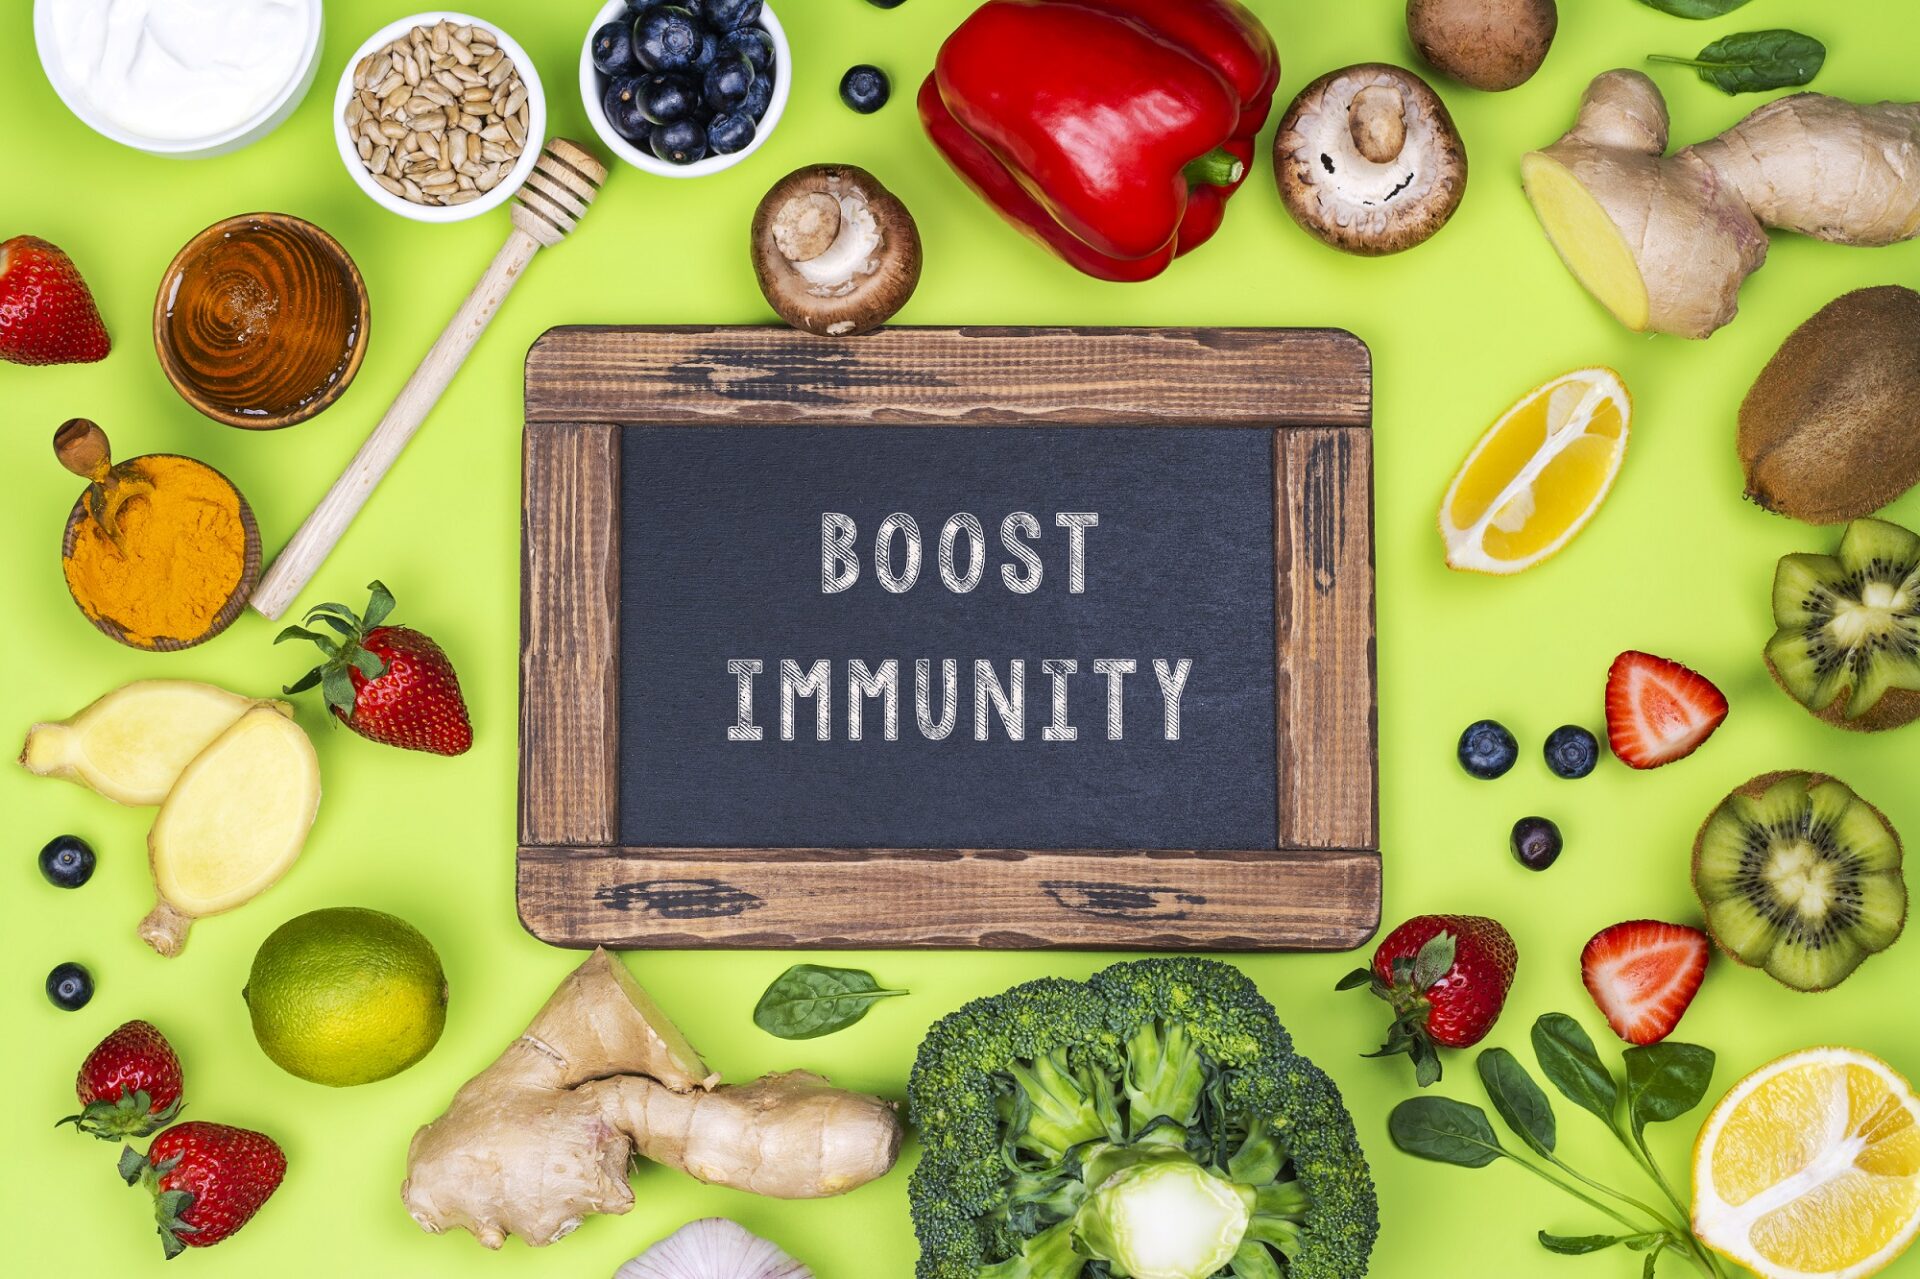 Immune system boosters